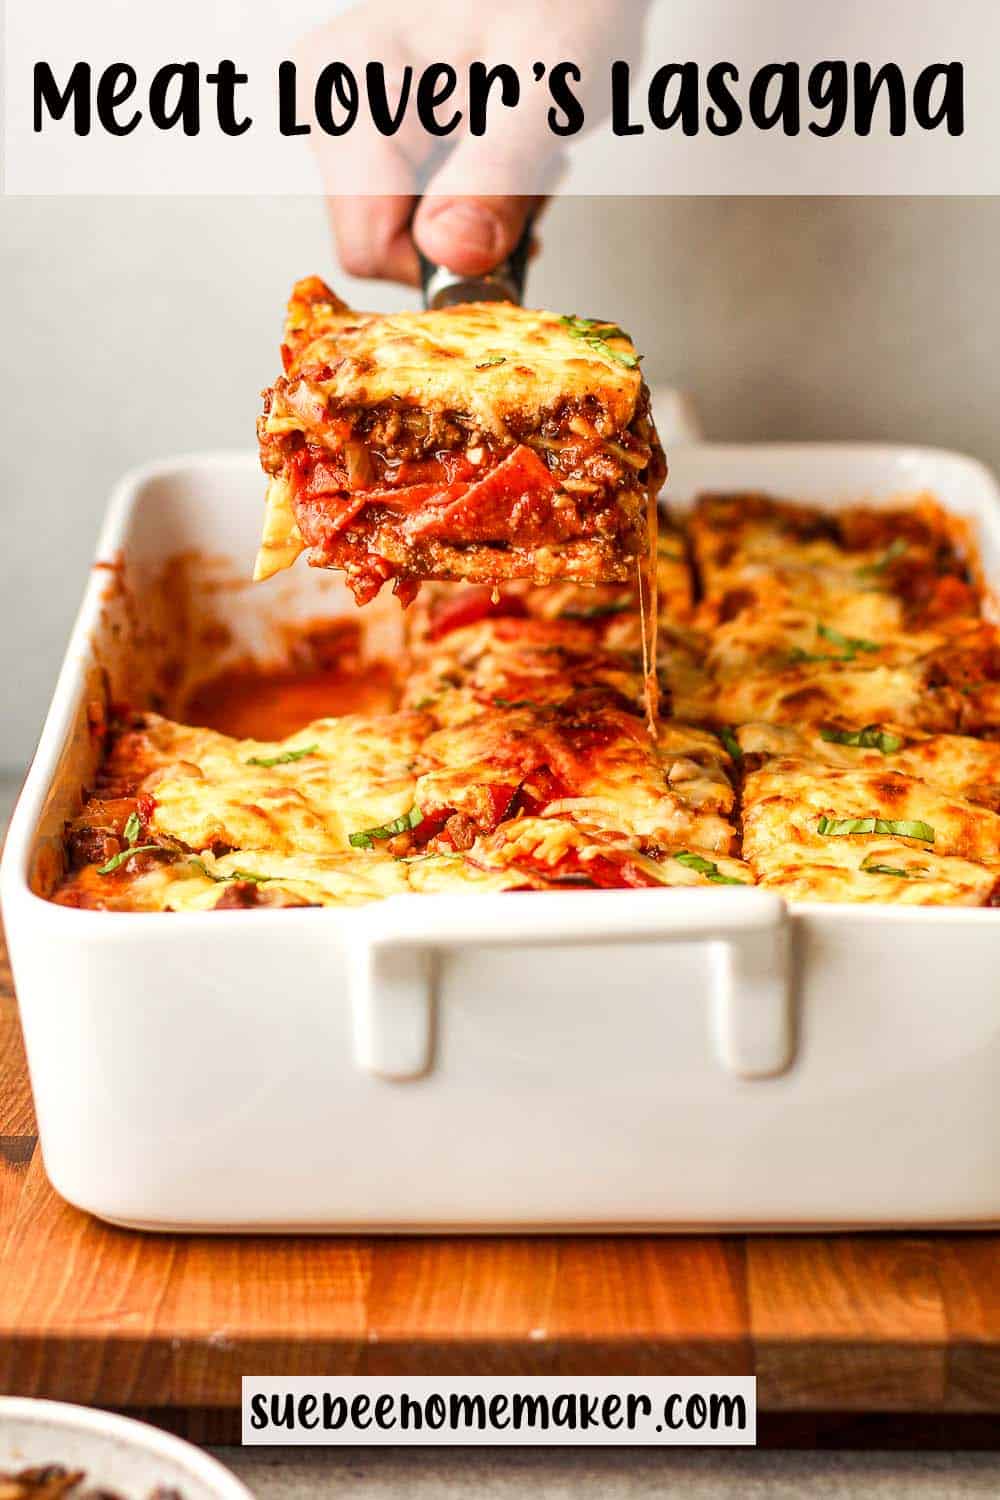 A hand using a spatula to hold up a large piece of meat lover's lasagna.